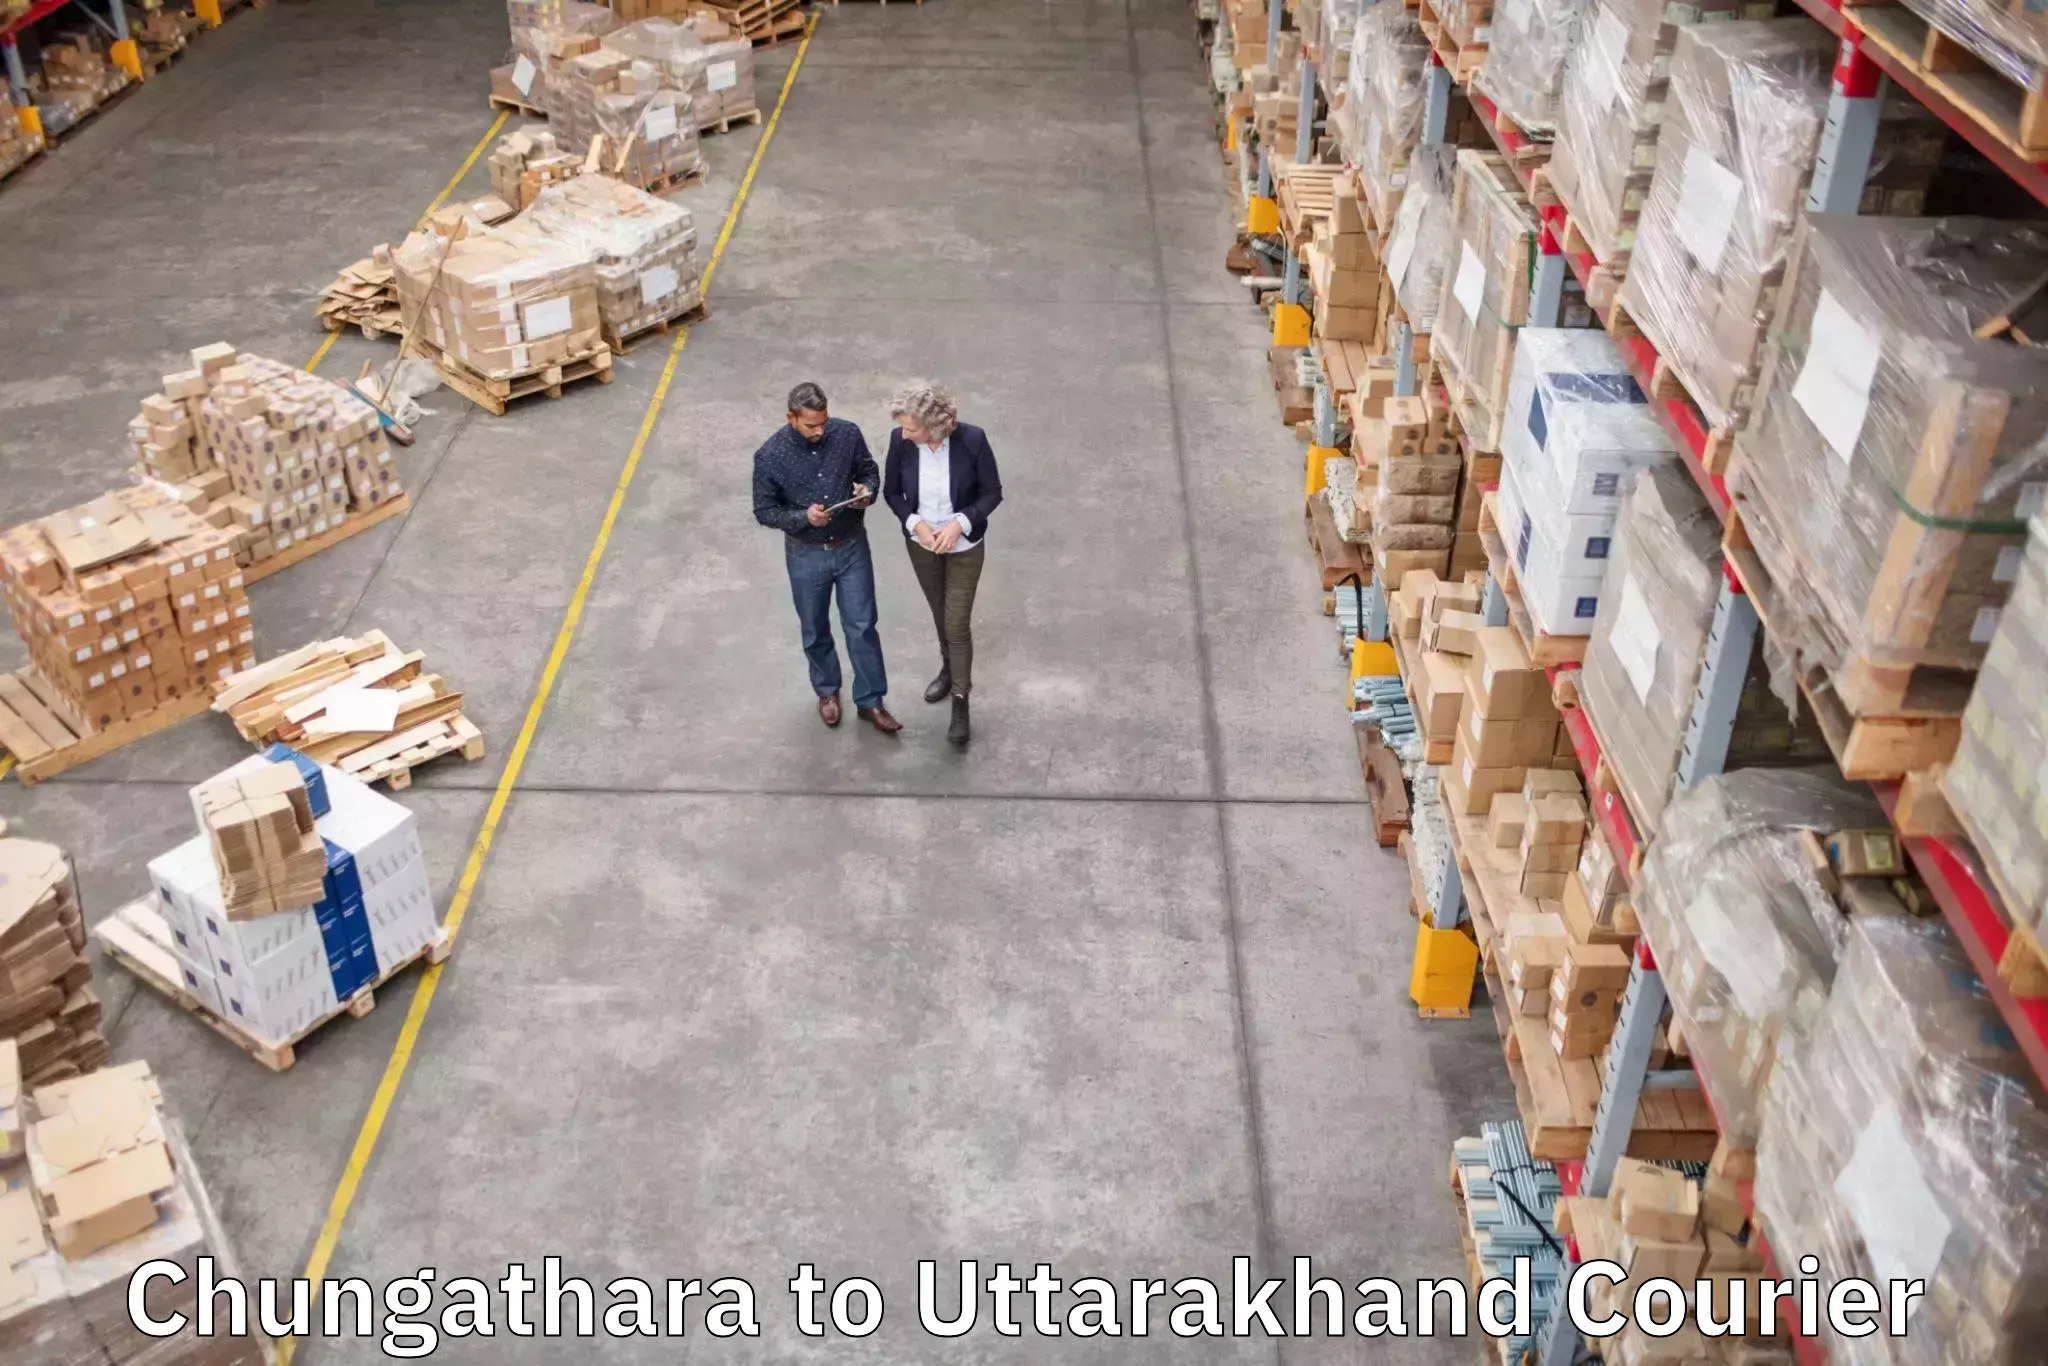 Baggage delivery management in Chungathara to Rudraprayag